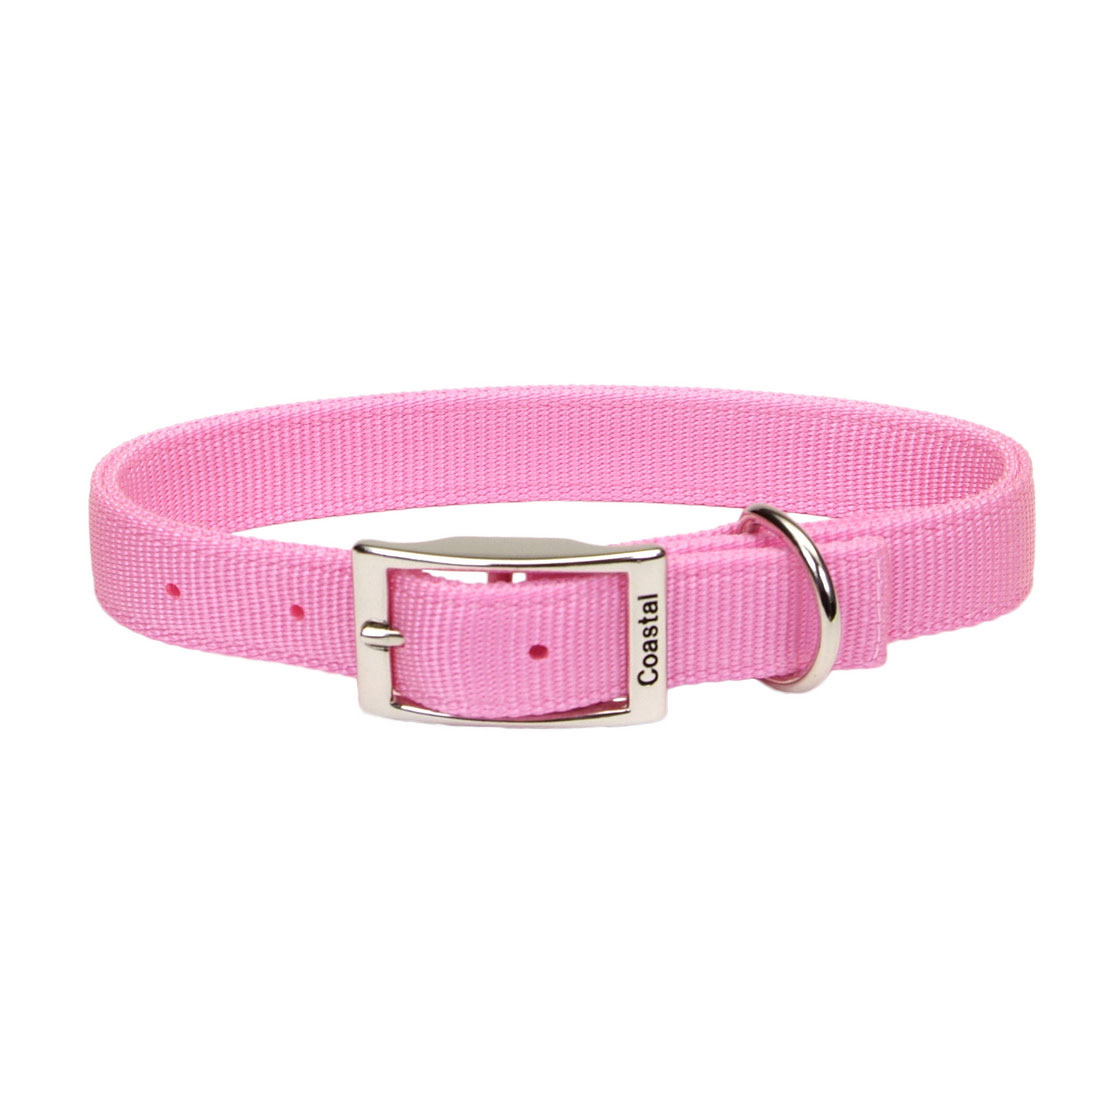 Coastal Pet Products 1" Adjustable Double-Ply Dog Collar w/Metal Buckle (24") - Pink